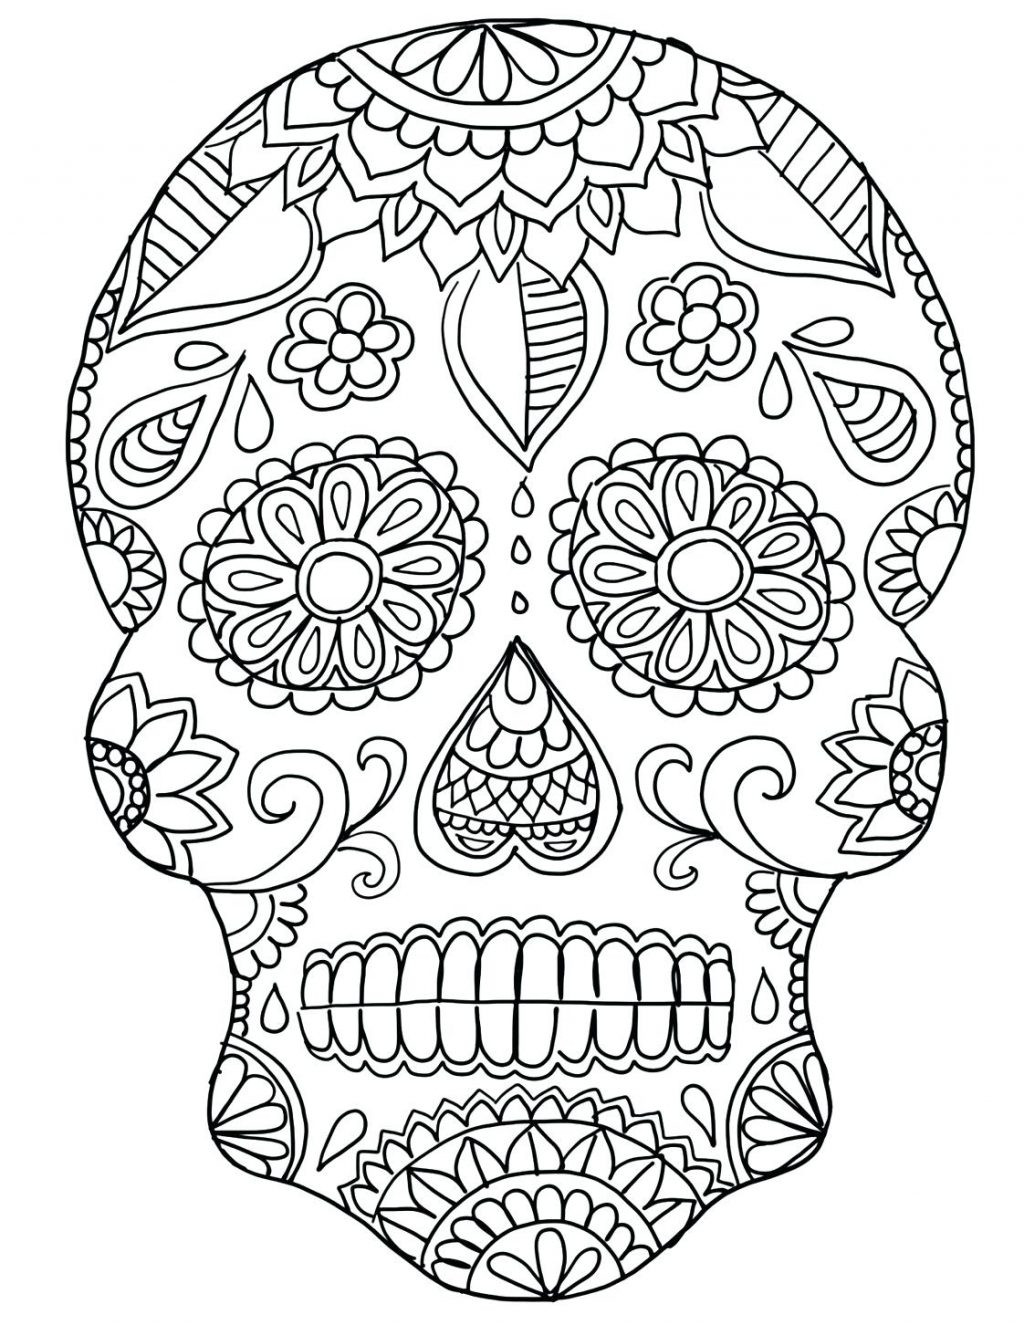 day-of-the-dead-skull-coloring-page-at-getdrawings-free-download